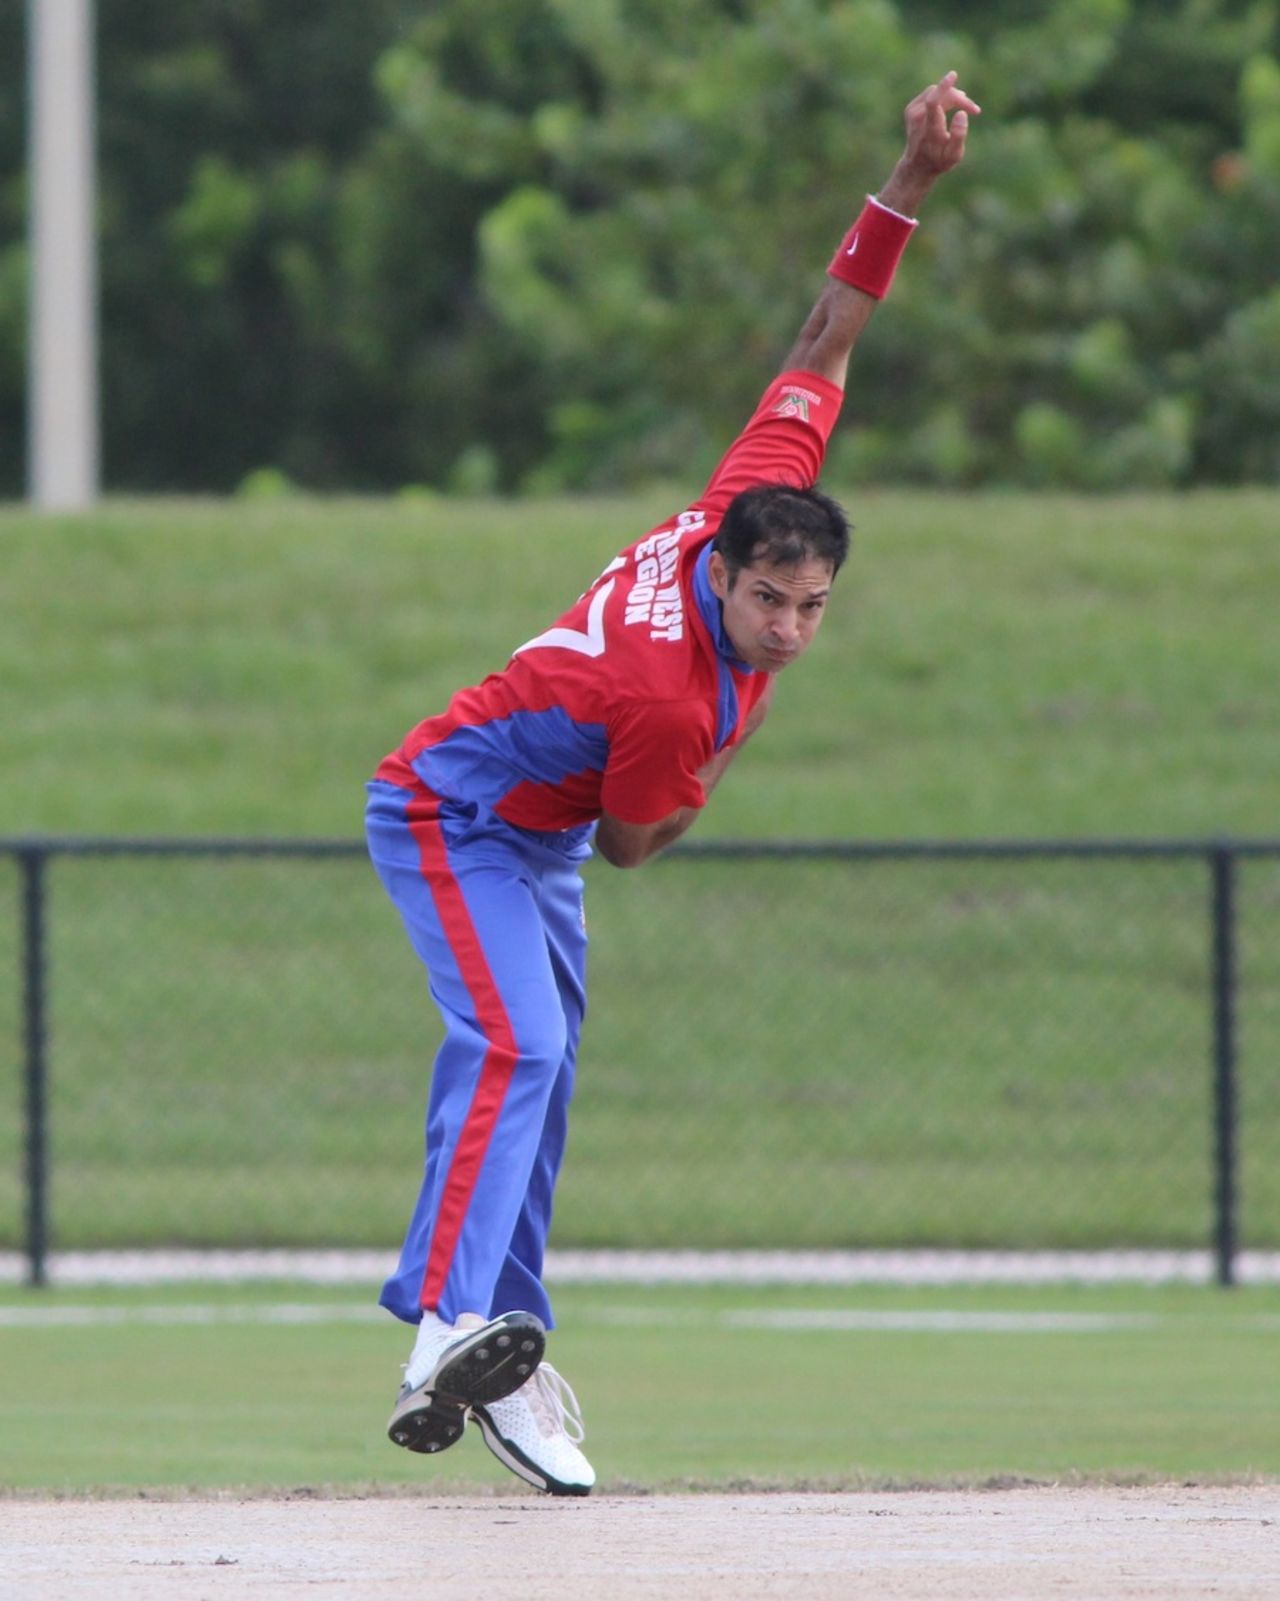 Usman Shuja sends one down to a North East batsman, Central West v North East, USACA T20 National Championship, Lauderhill, August 16, 2014